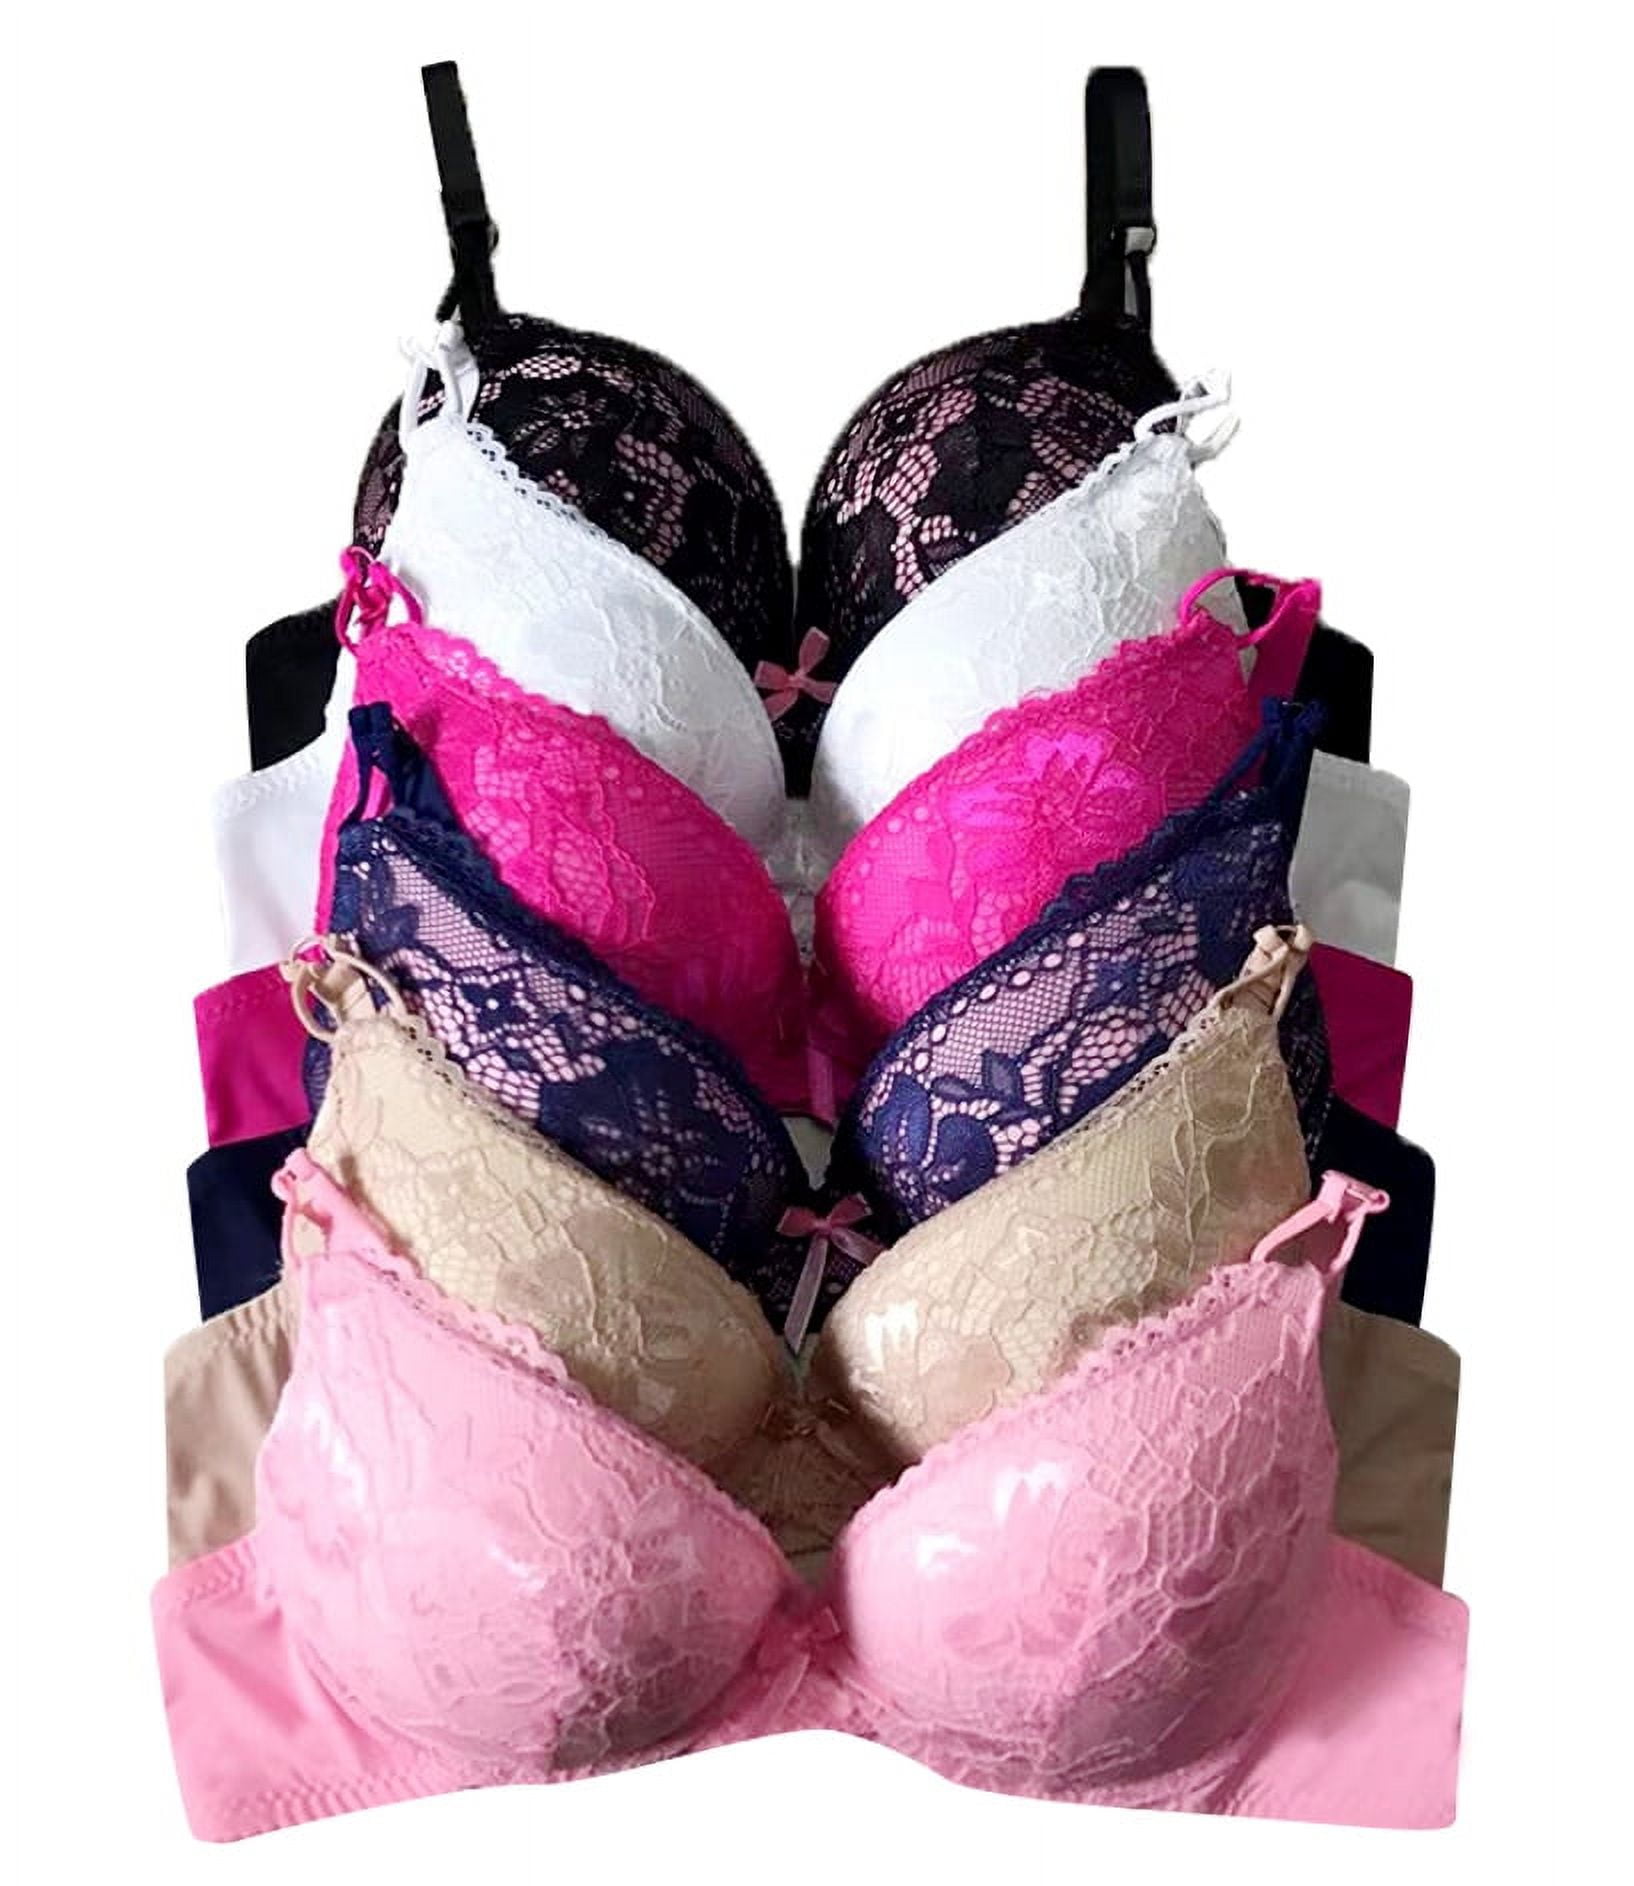 Women Bras 6 Pack of Double Pushup Lace Bra B cup C cup Size 34B (9901)